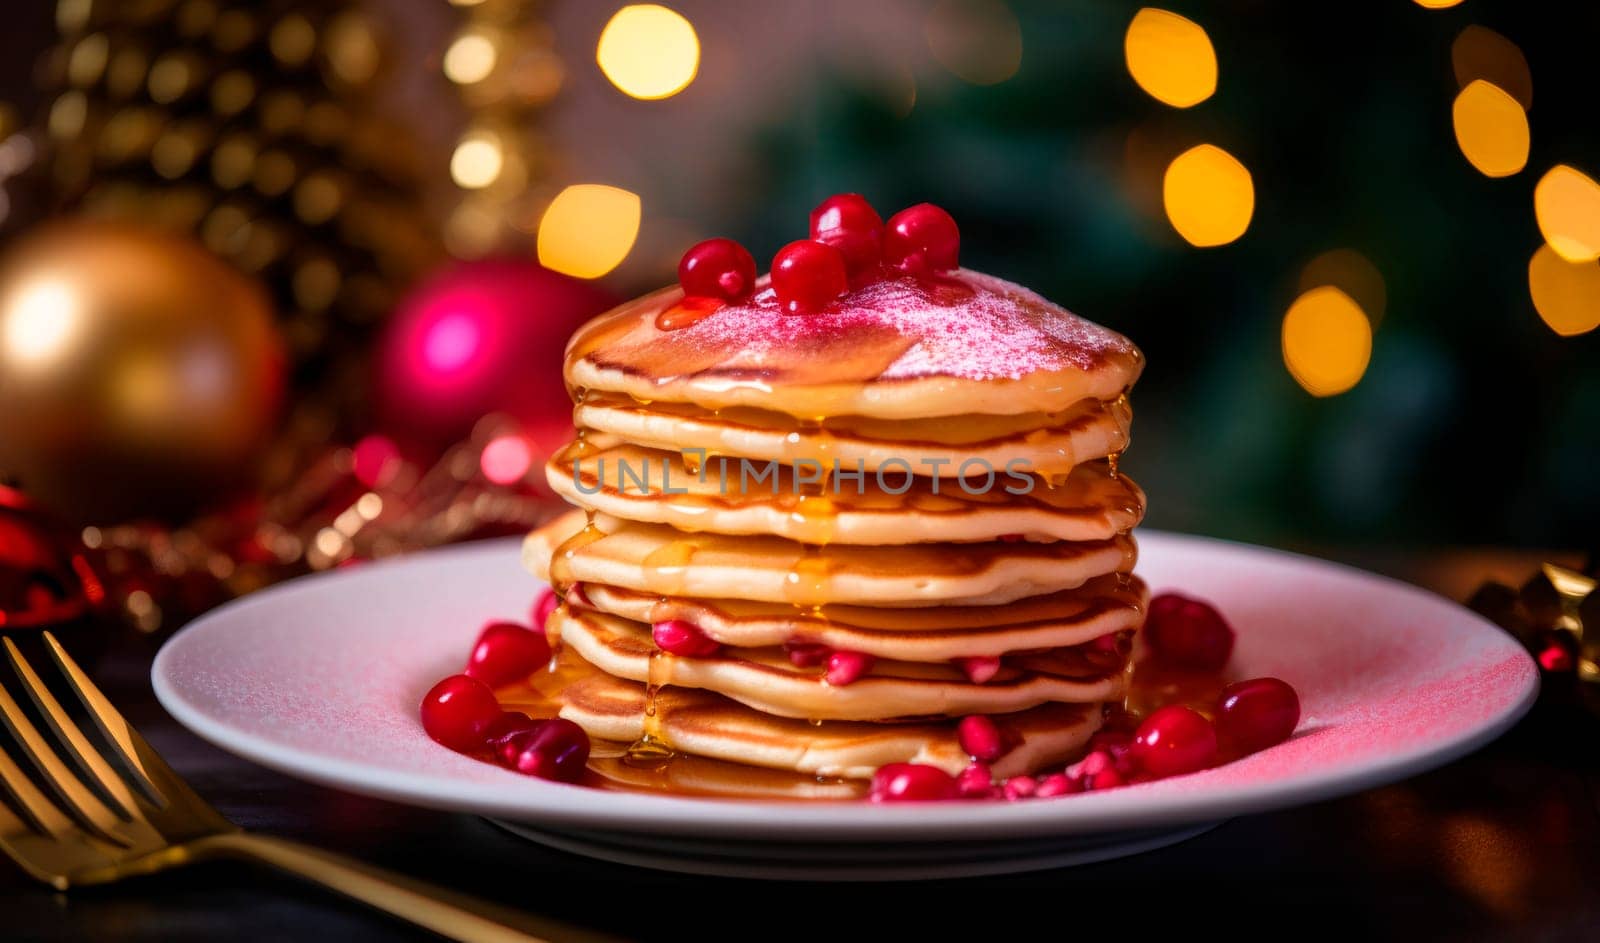 Delicious fresh pancakes with honey and currants in a plate with Christmas decoration stands on a dark table against a background of blurry bokeh lights, close-up side view.